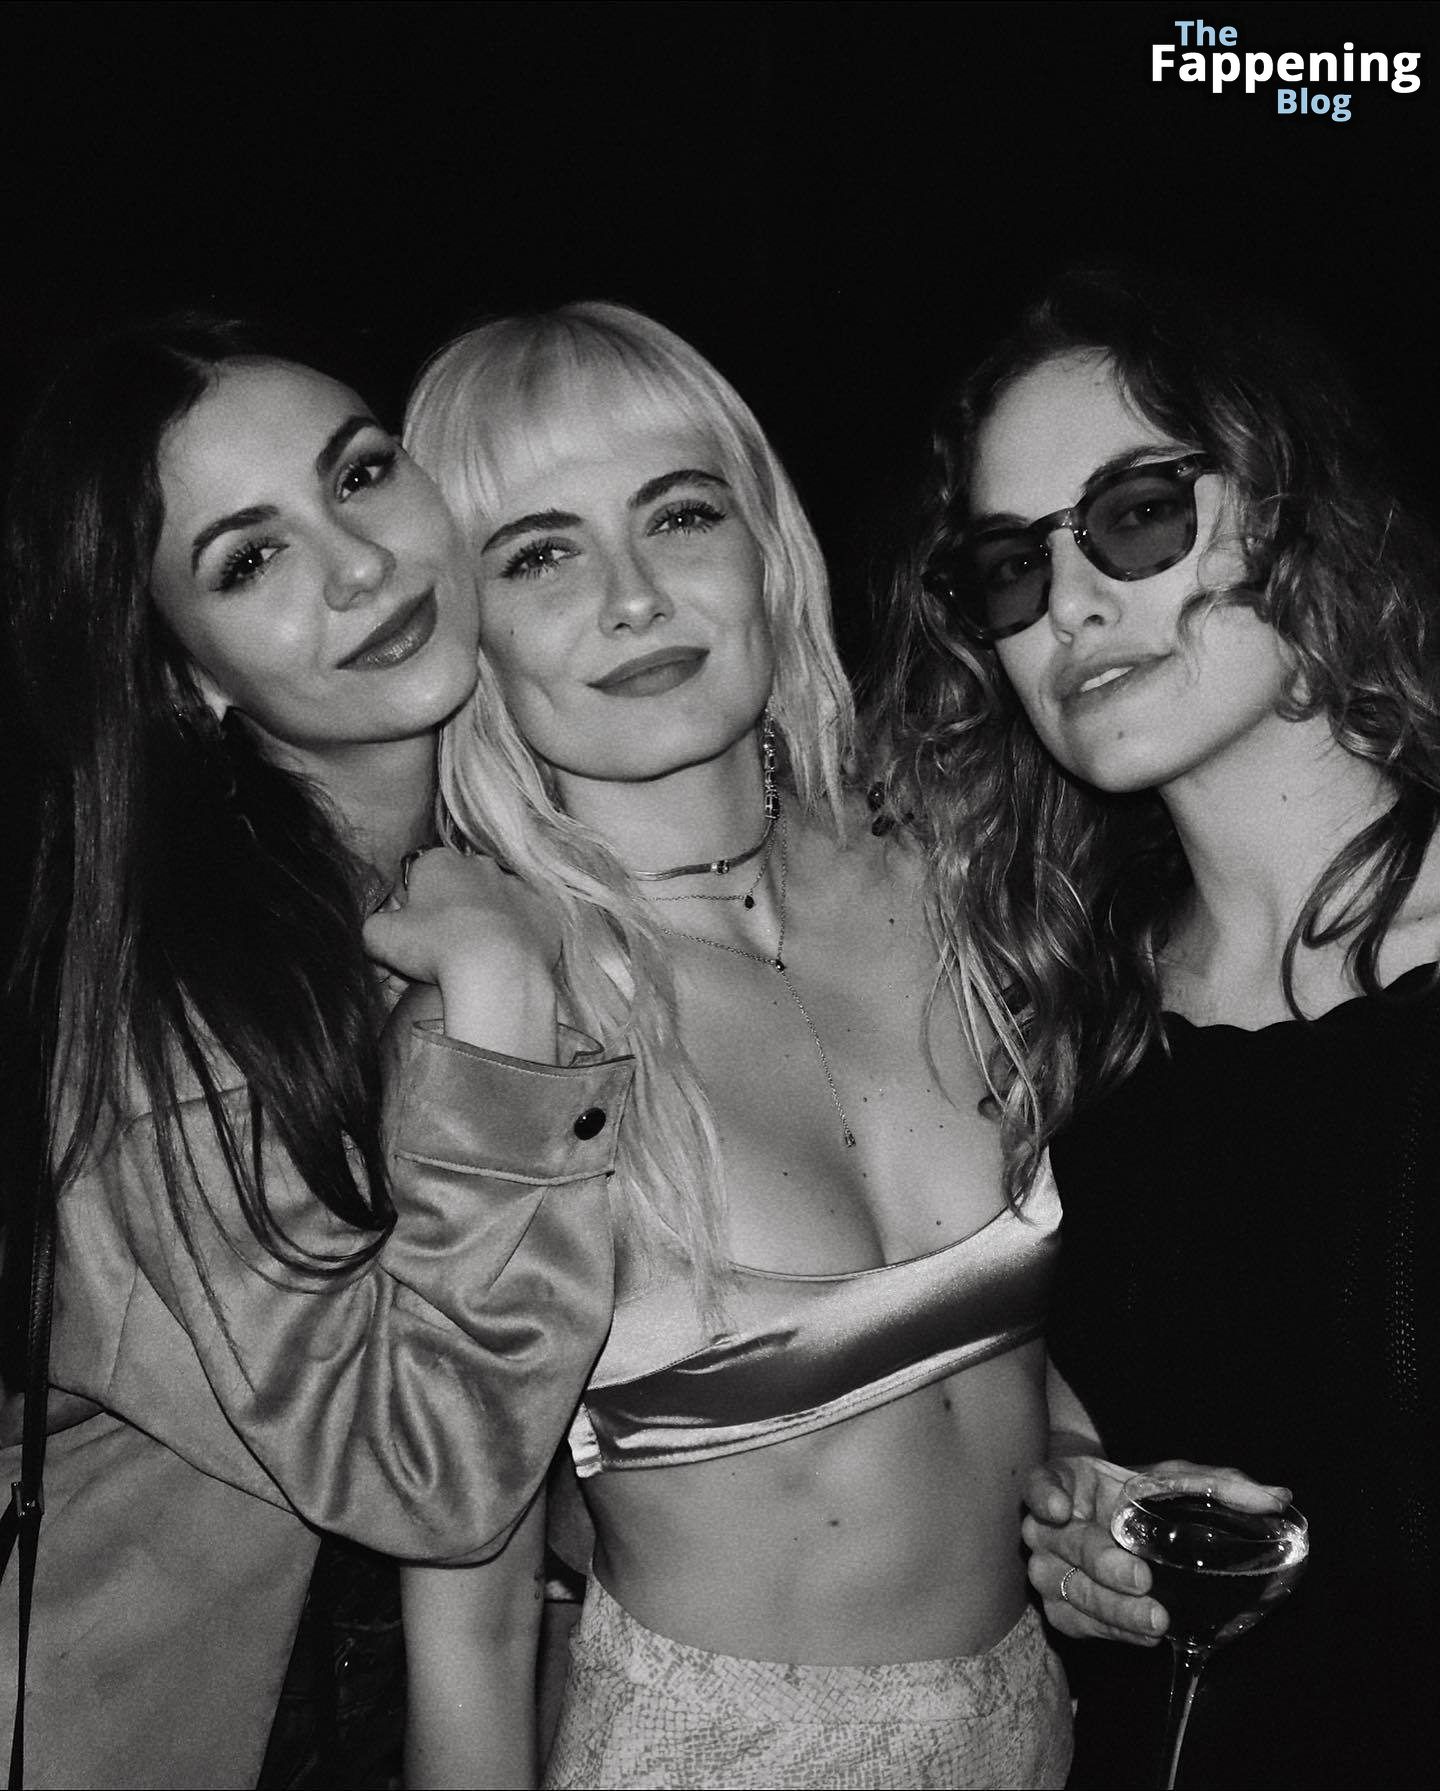 Victoria Justice Looks Sexy at the Party with Friends (15 Photos)